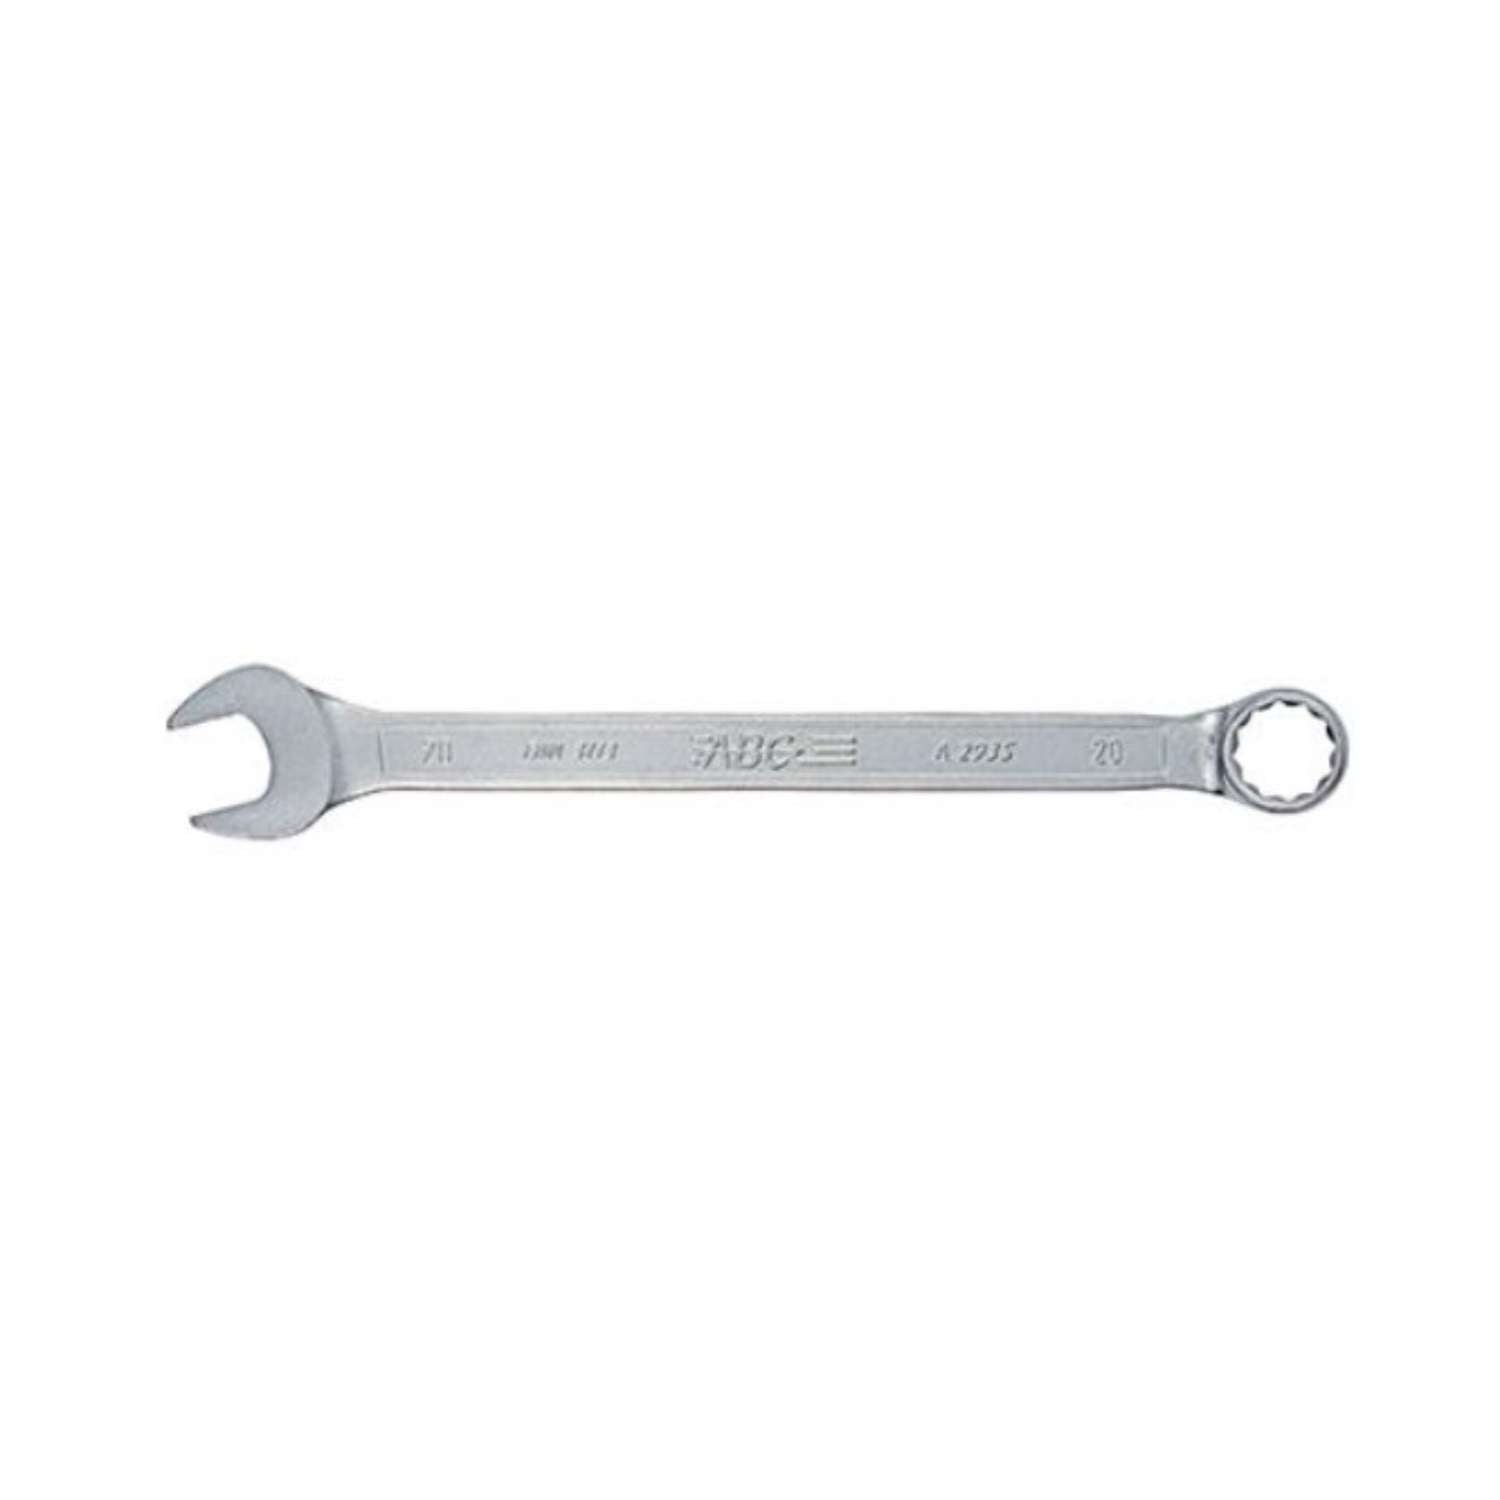 Combination spanner long type 6 to 21 mm A 2935 ABC series